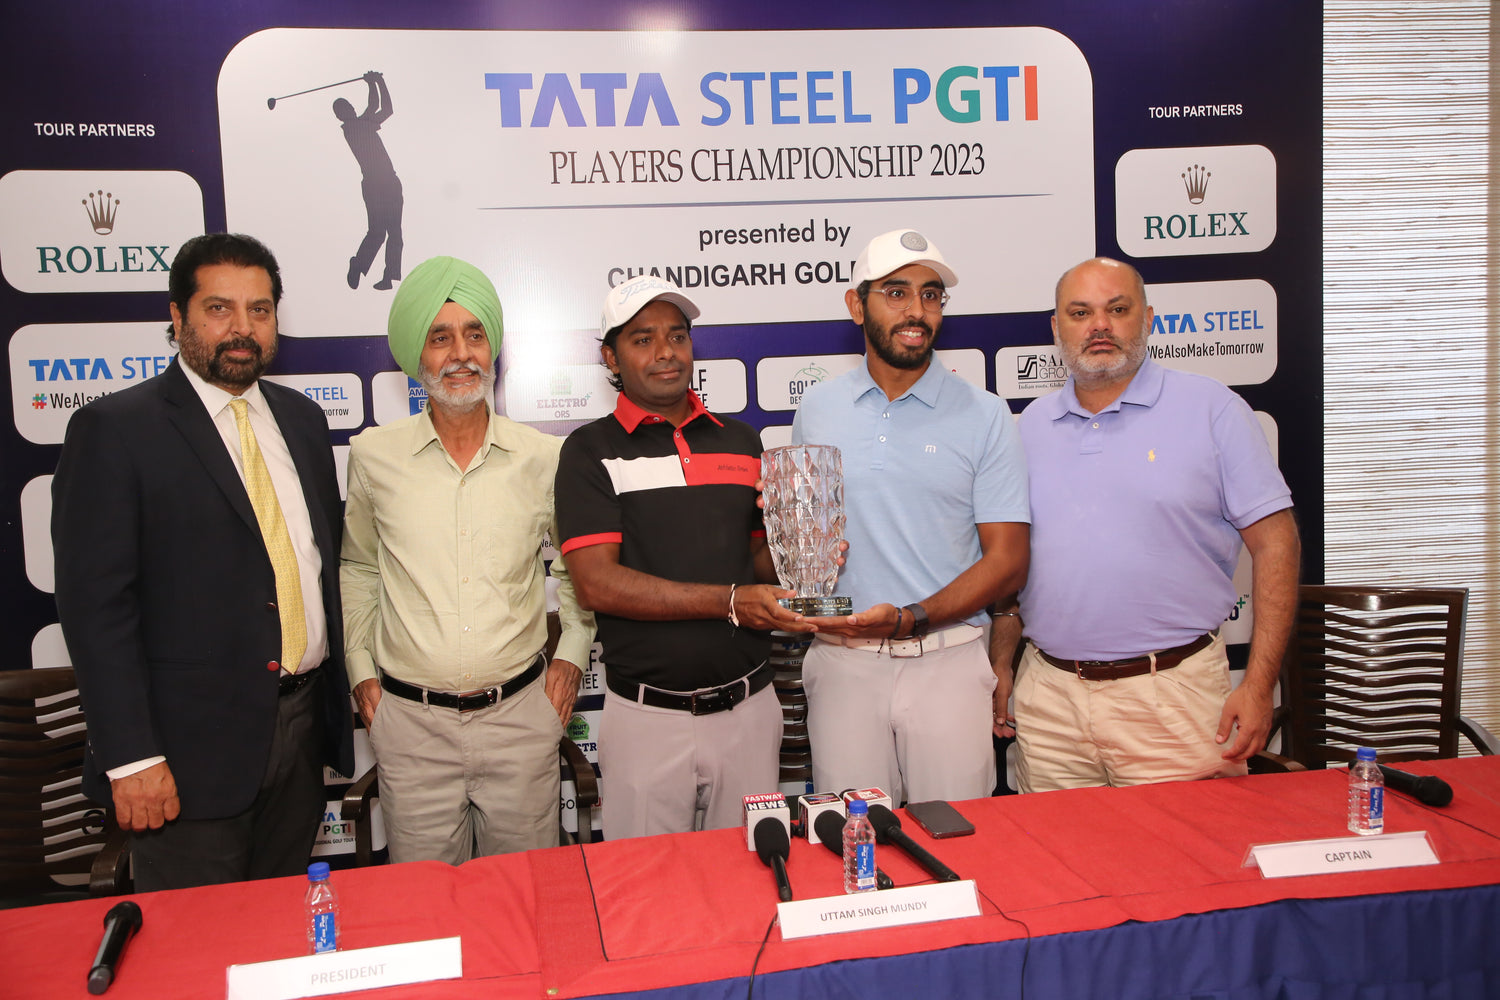 TATA Steel PGTI Players Championship 2023 presented by Chandigarh Golf Club gets underway from April 12